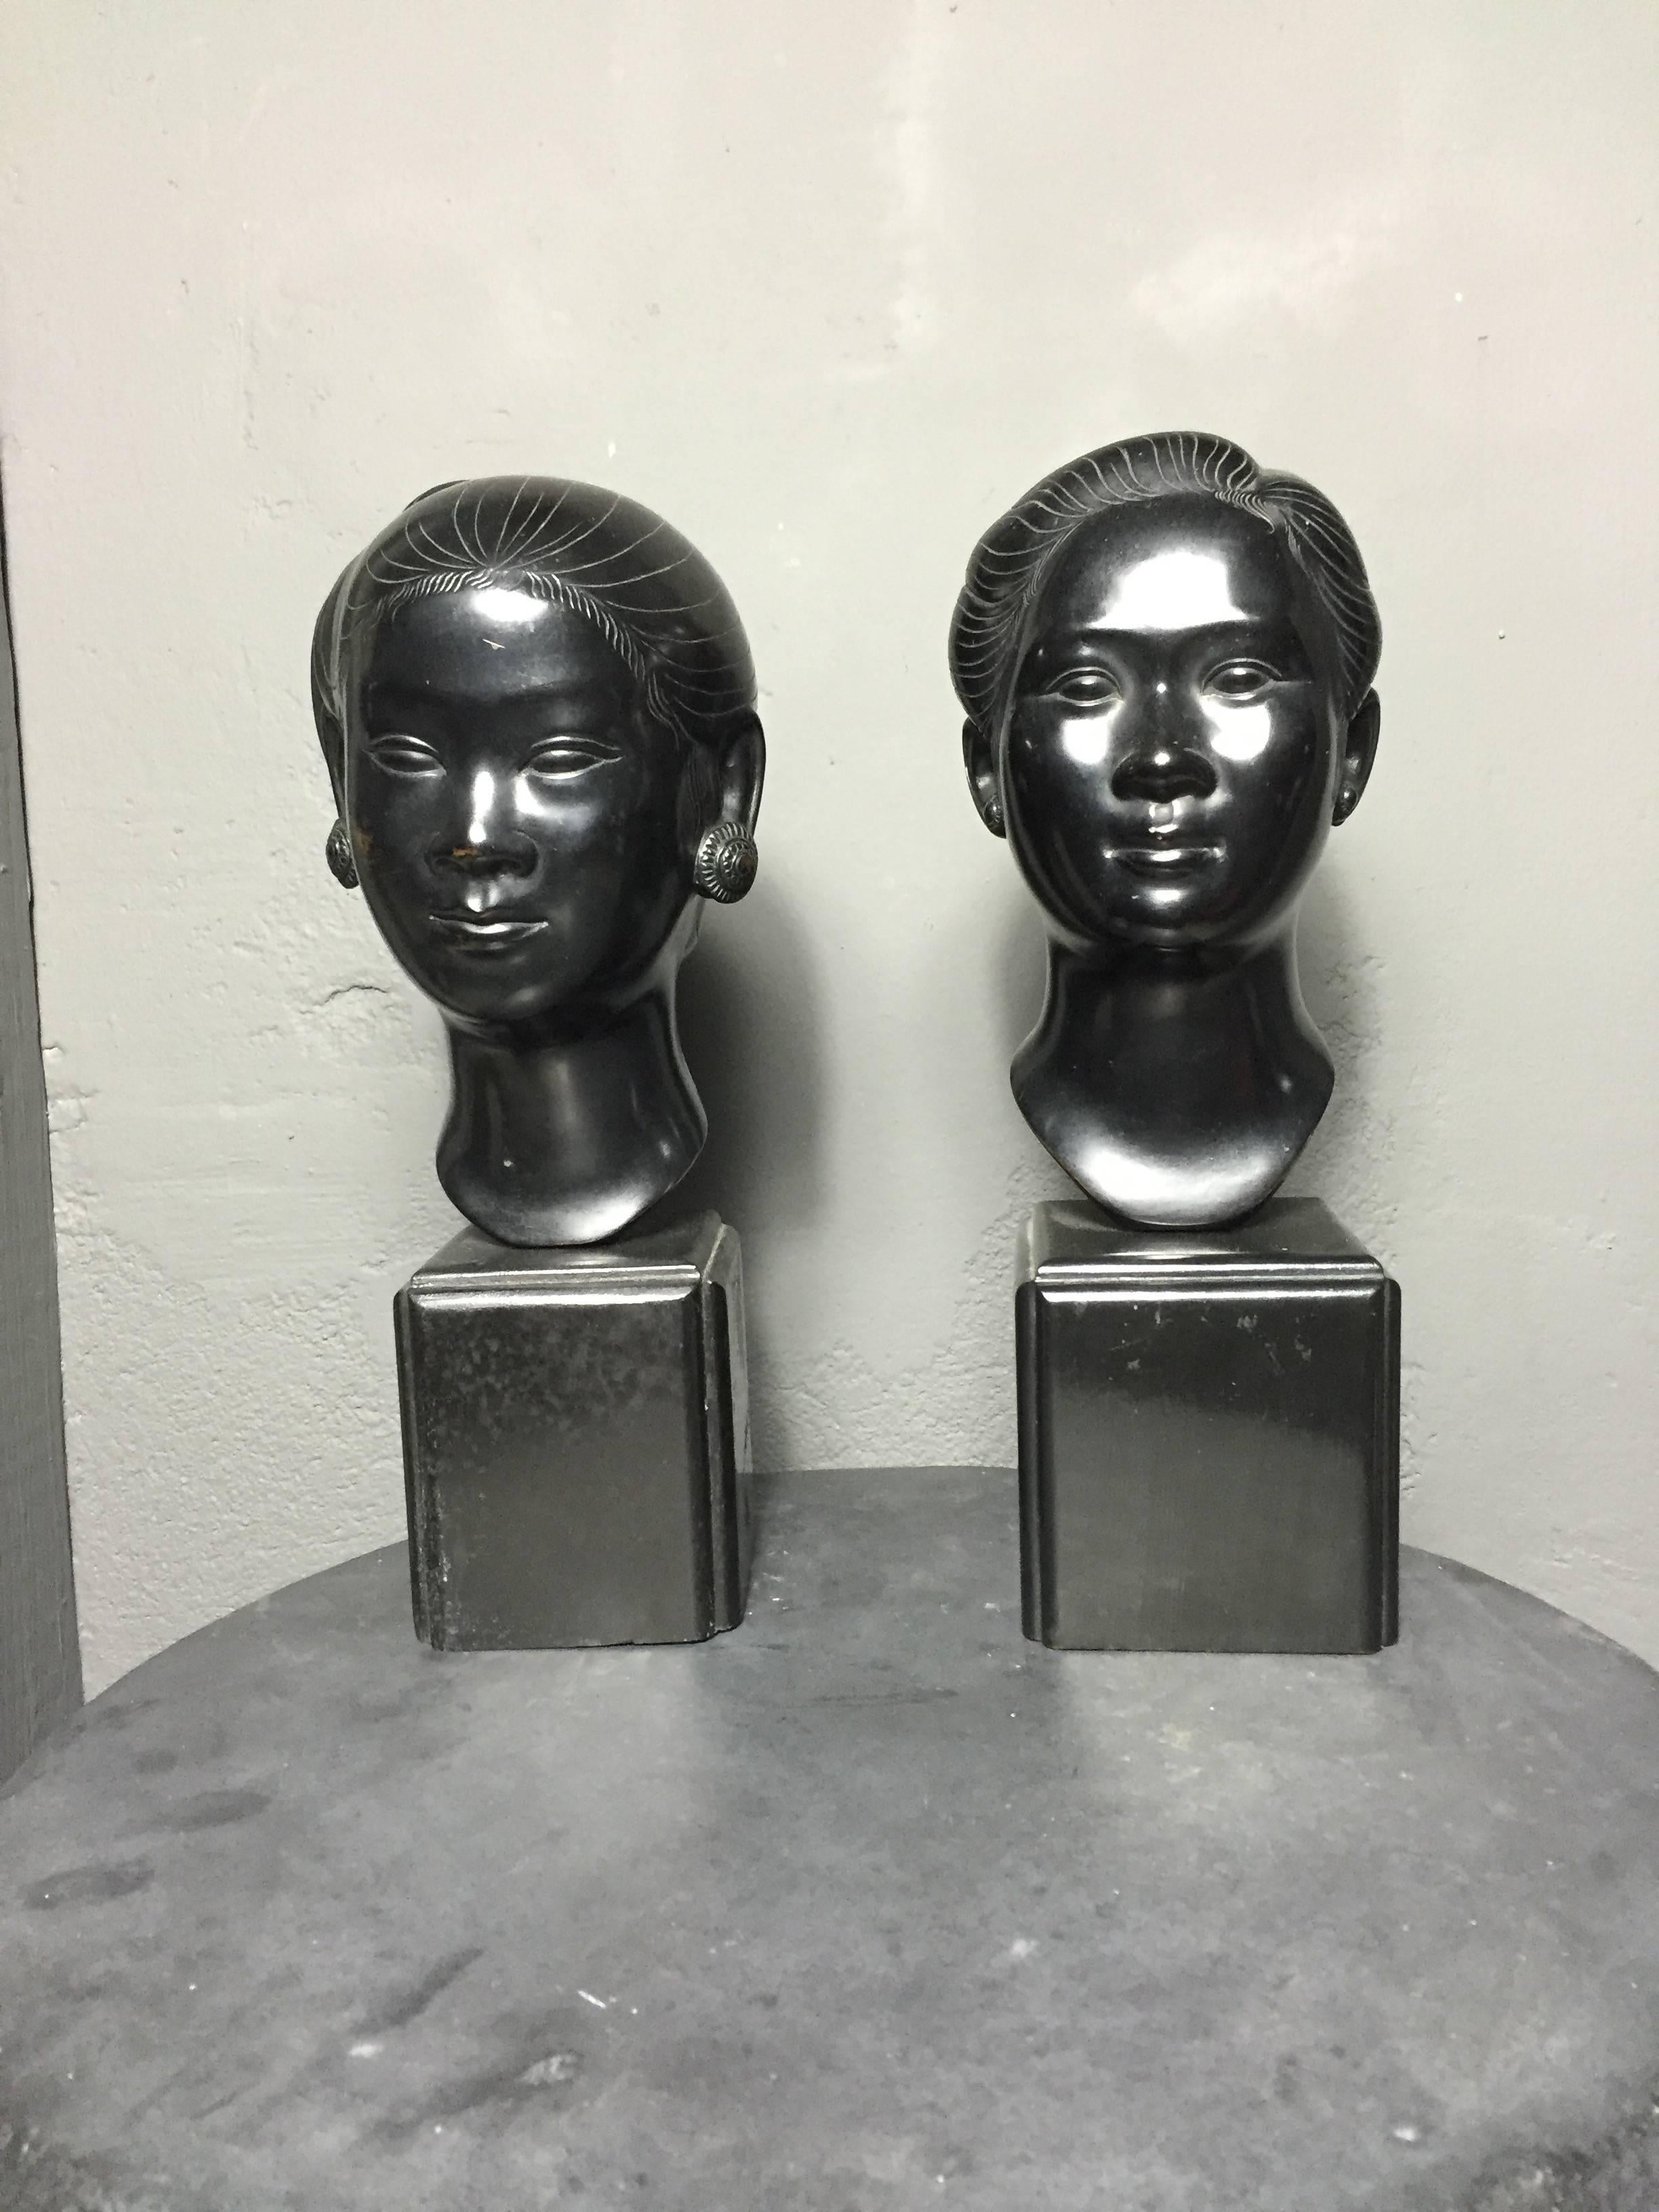 Exquisite pair of black-cast bronze geisha in bust form on black painted wood base, possibly Vietnamese. Mid-century. Marks on each, see images.

Base dimension: 3.25 x 3.25 inches

